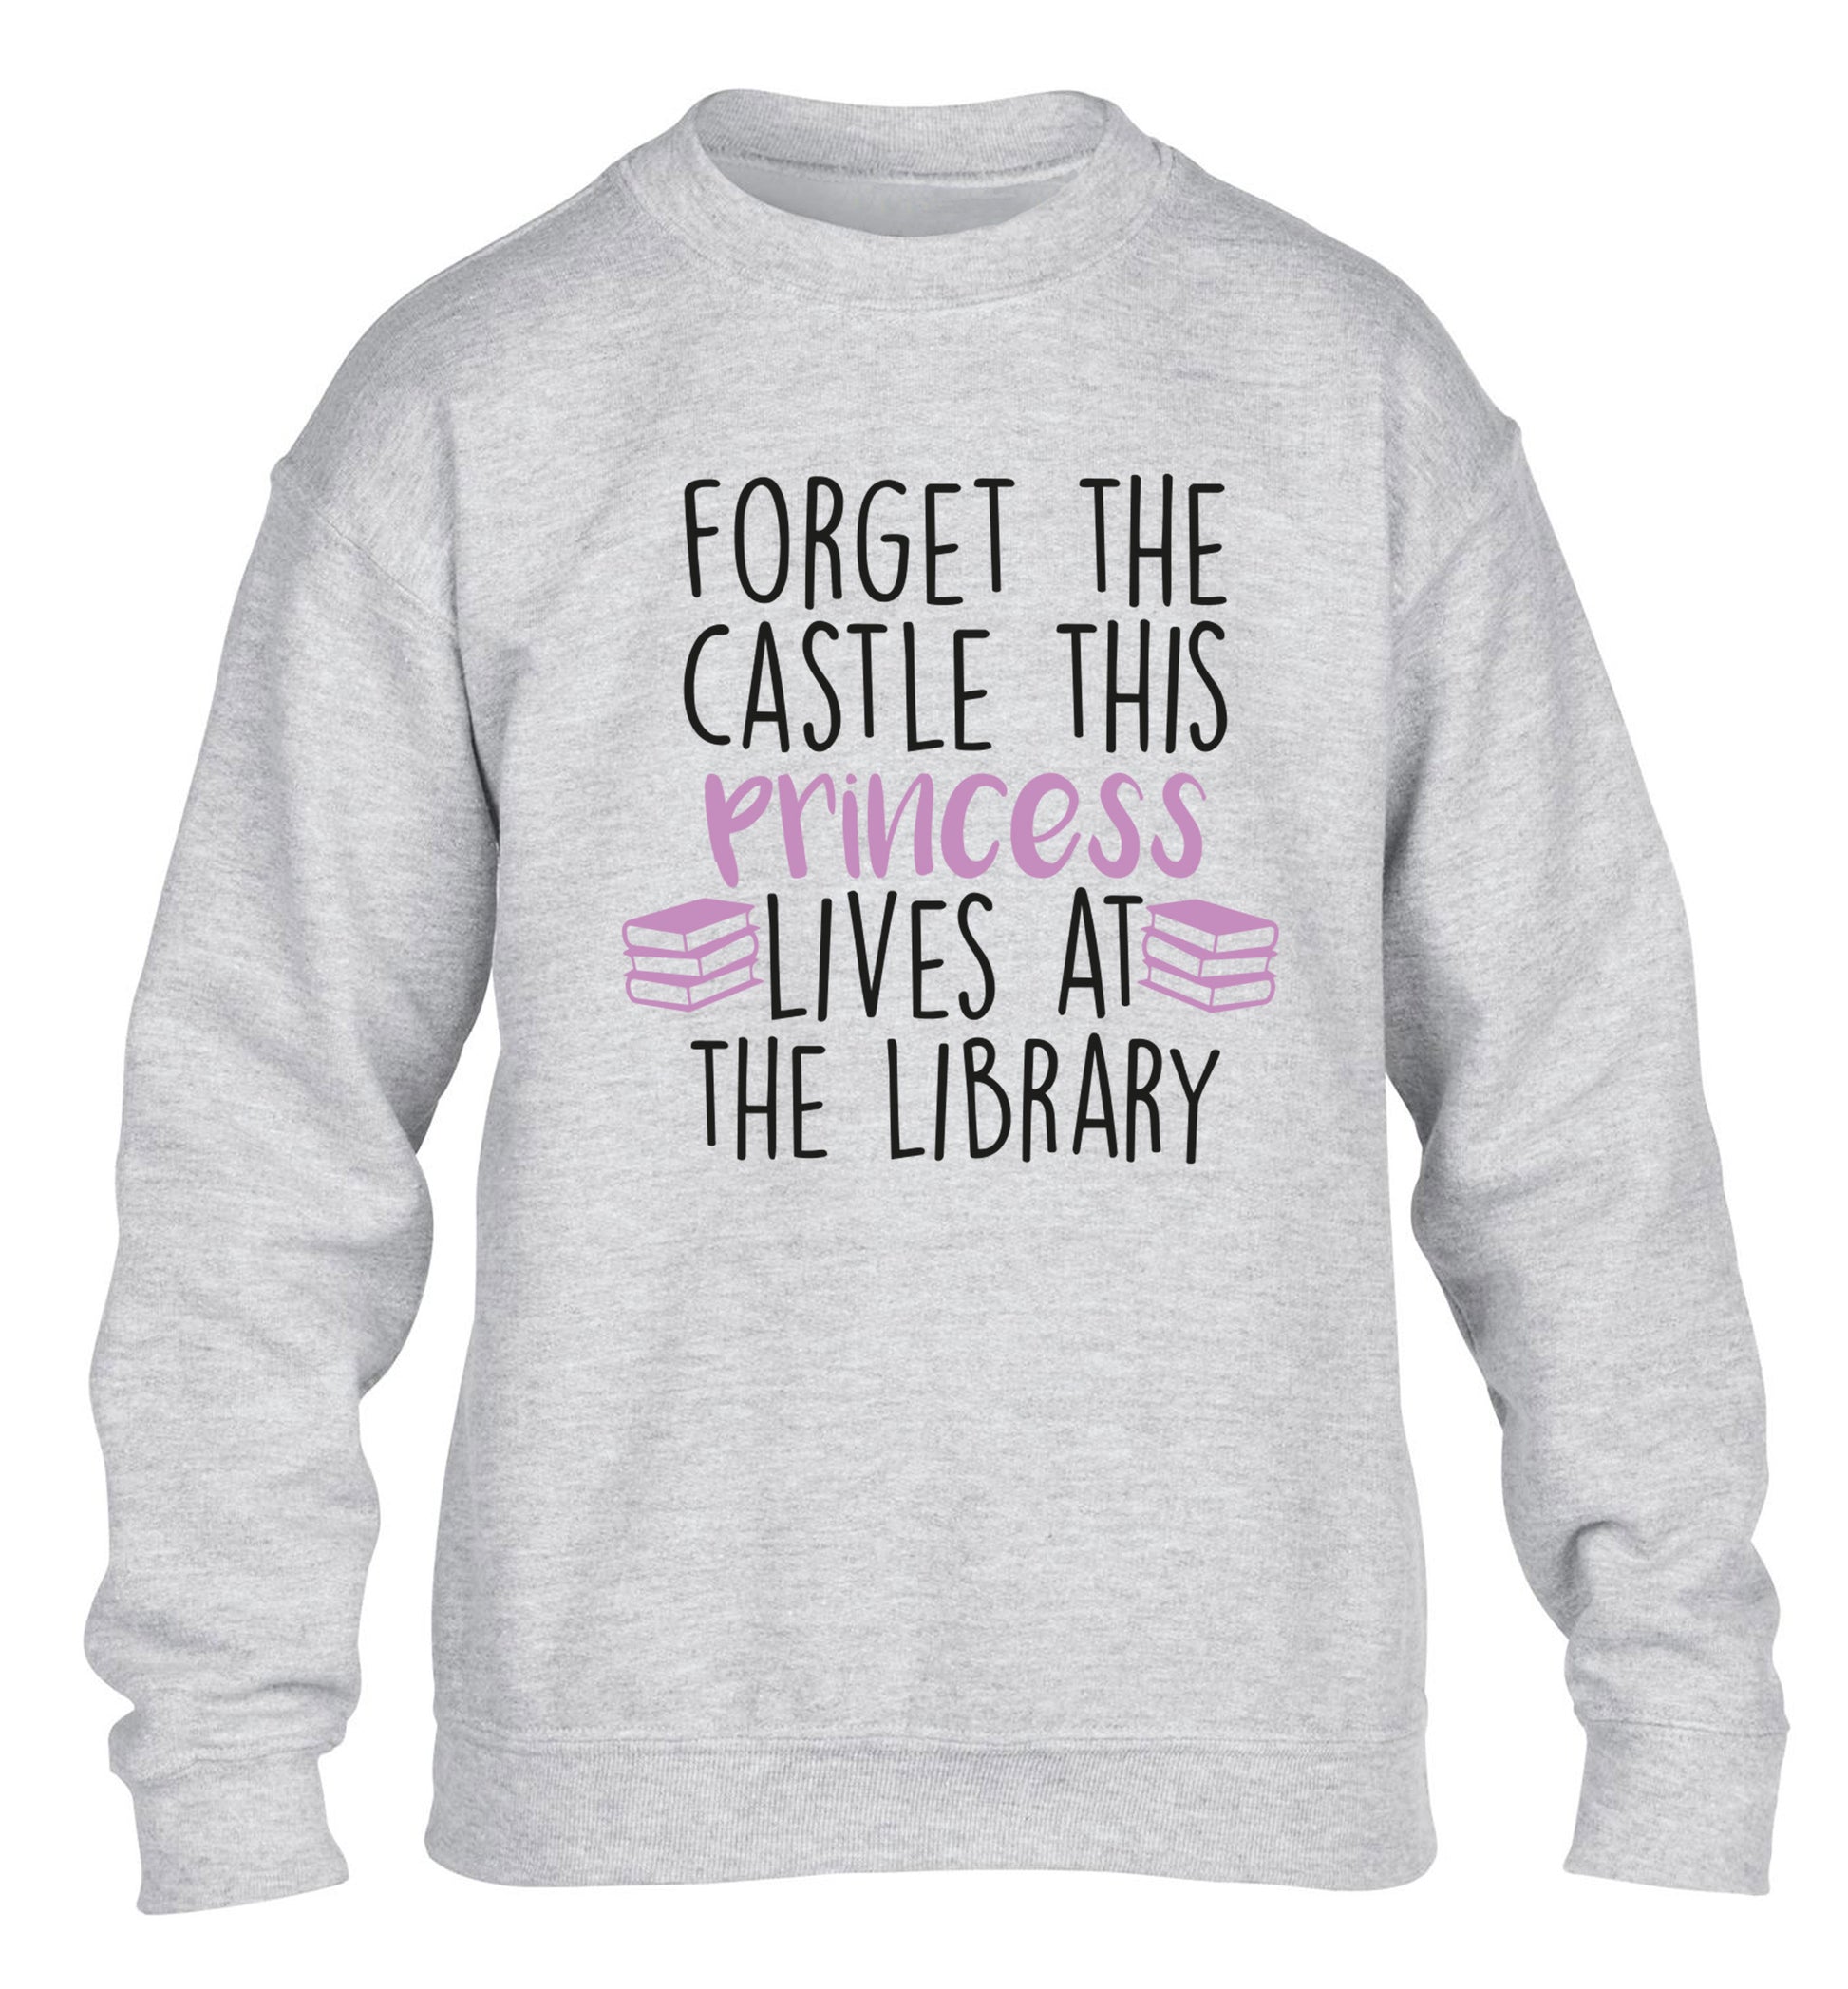 Forget the castle this princess lives at the library children's grey sweater 12-14 Years